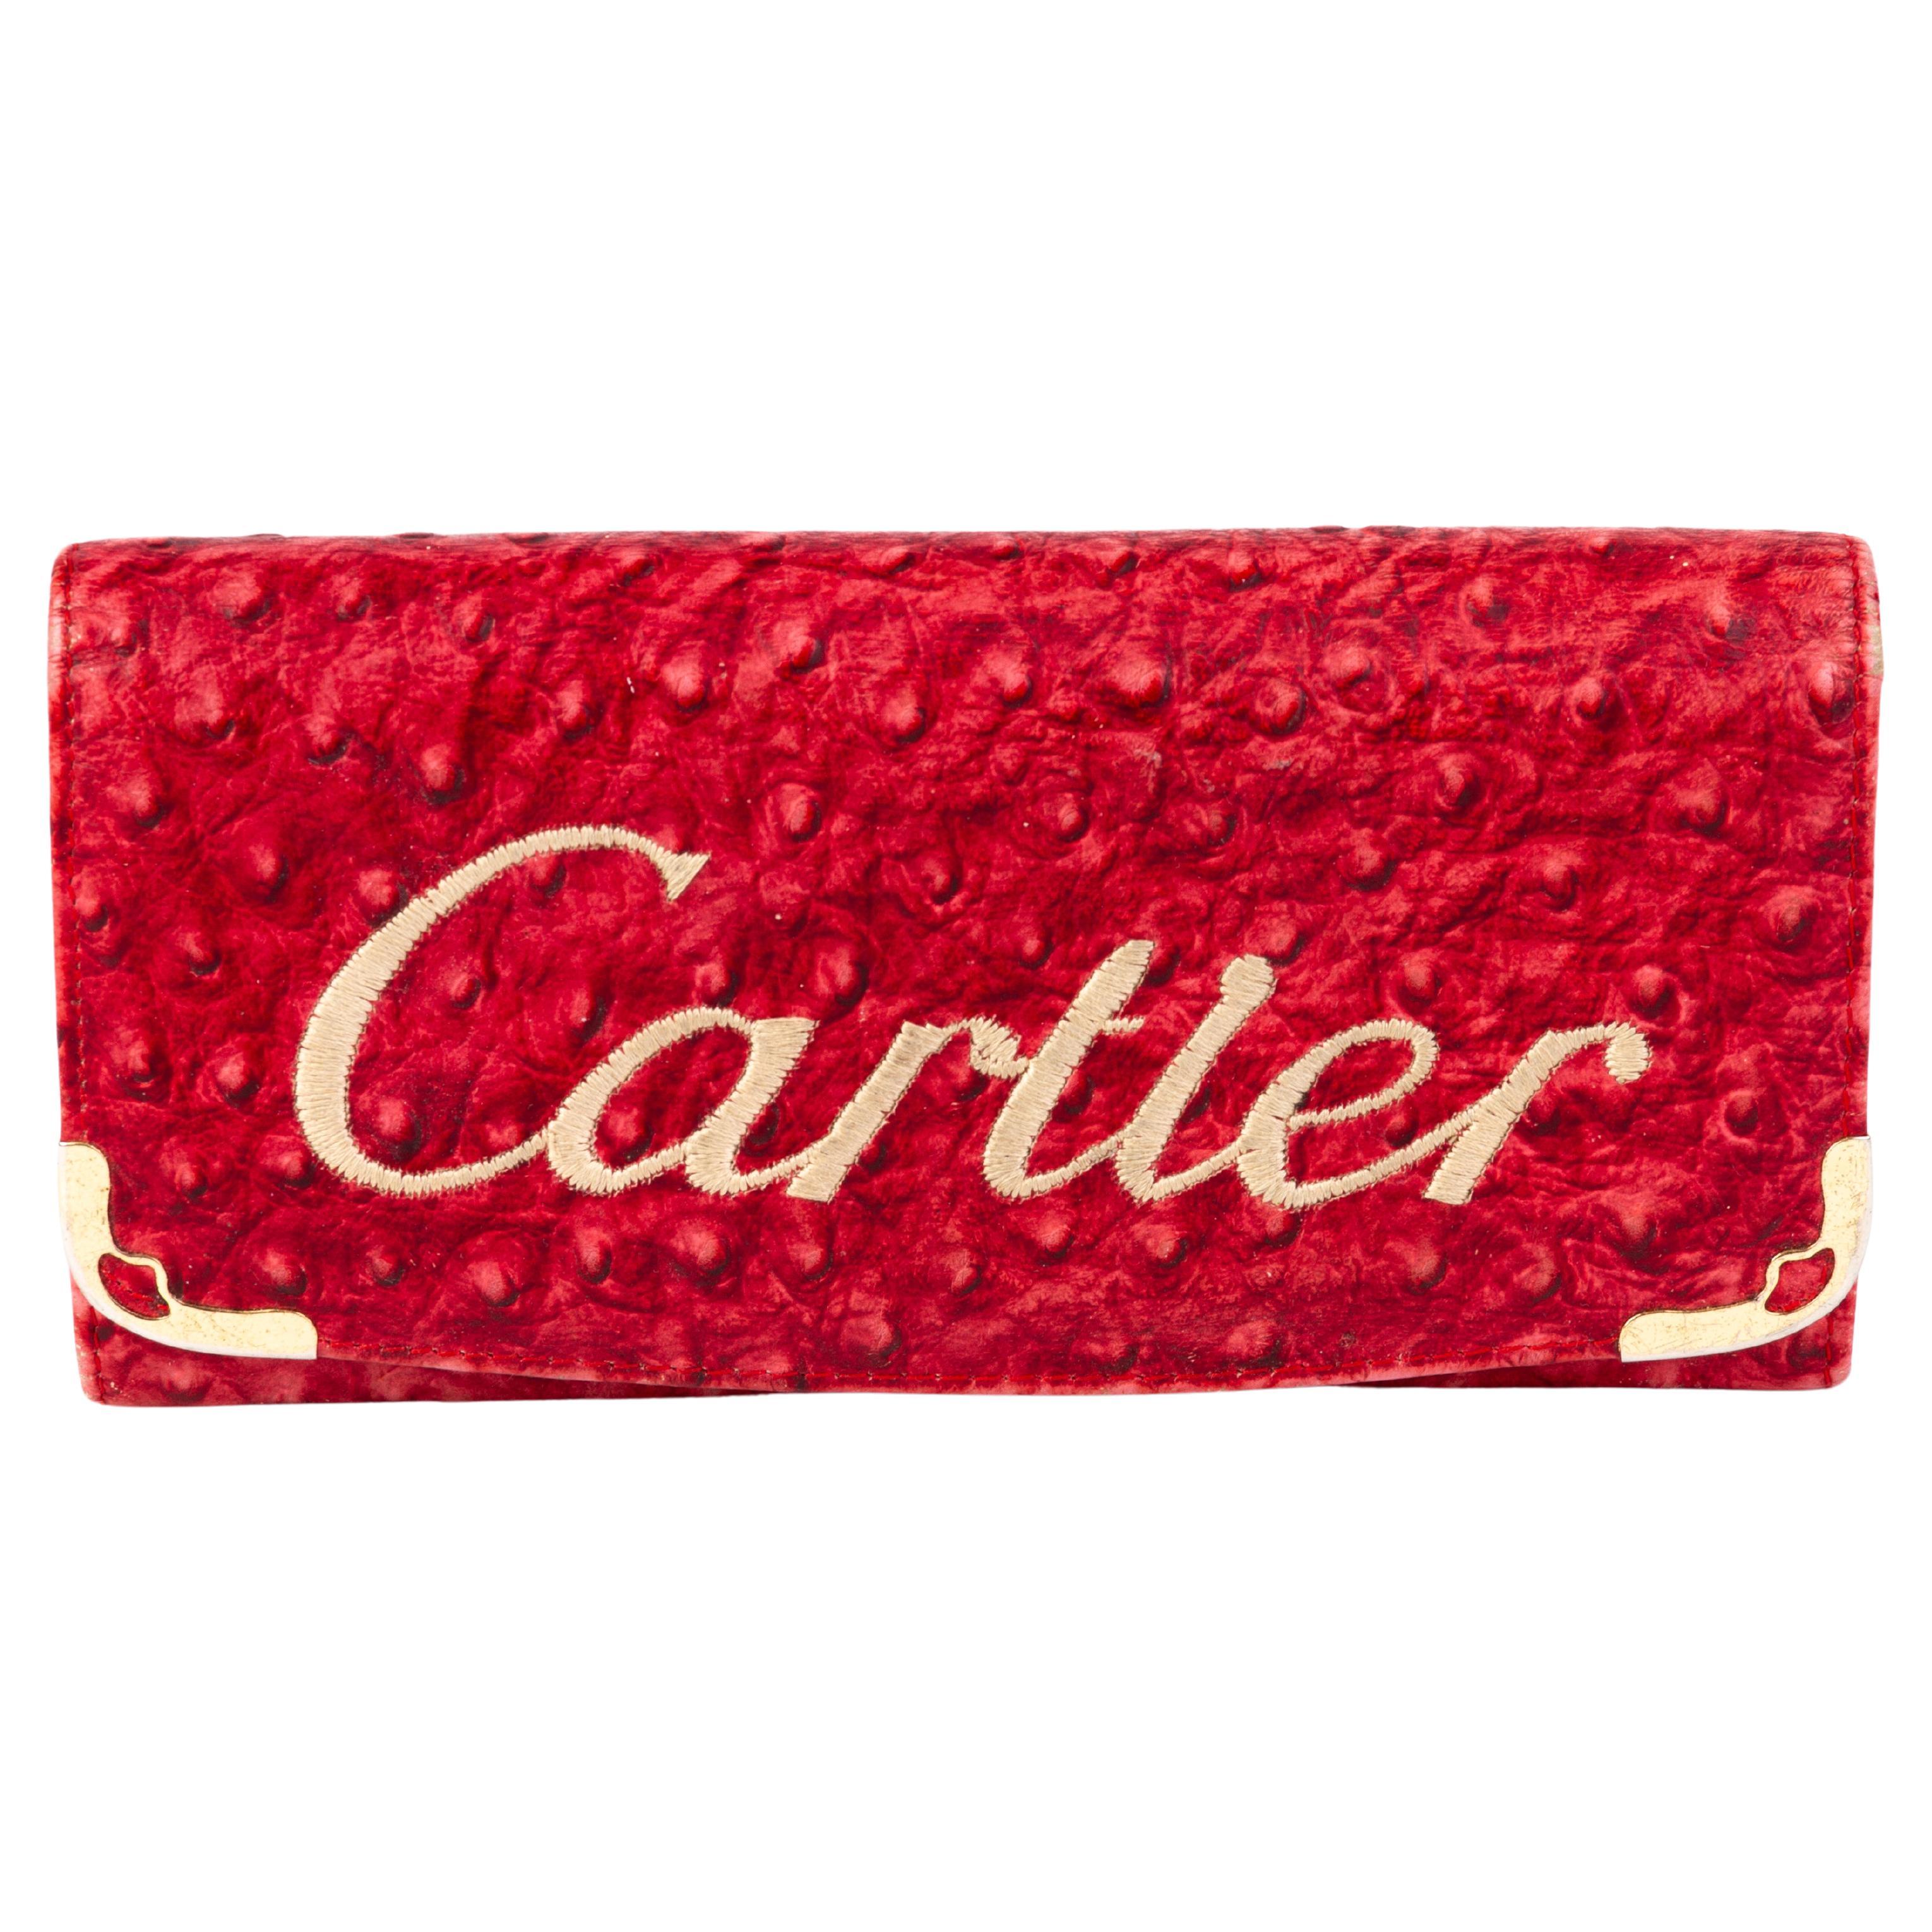 Vintage Cartier Embroidered Leather Purse  For Sale